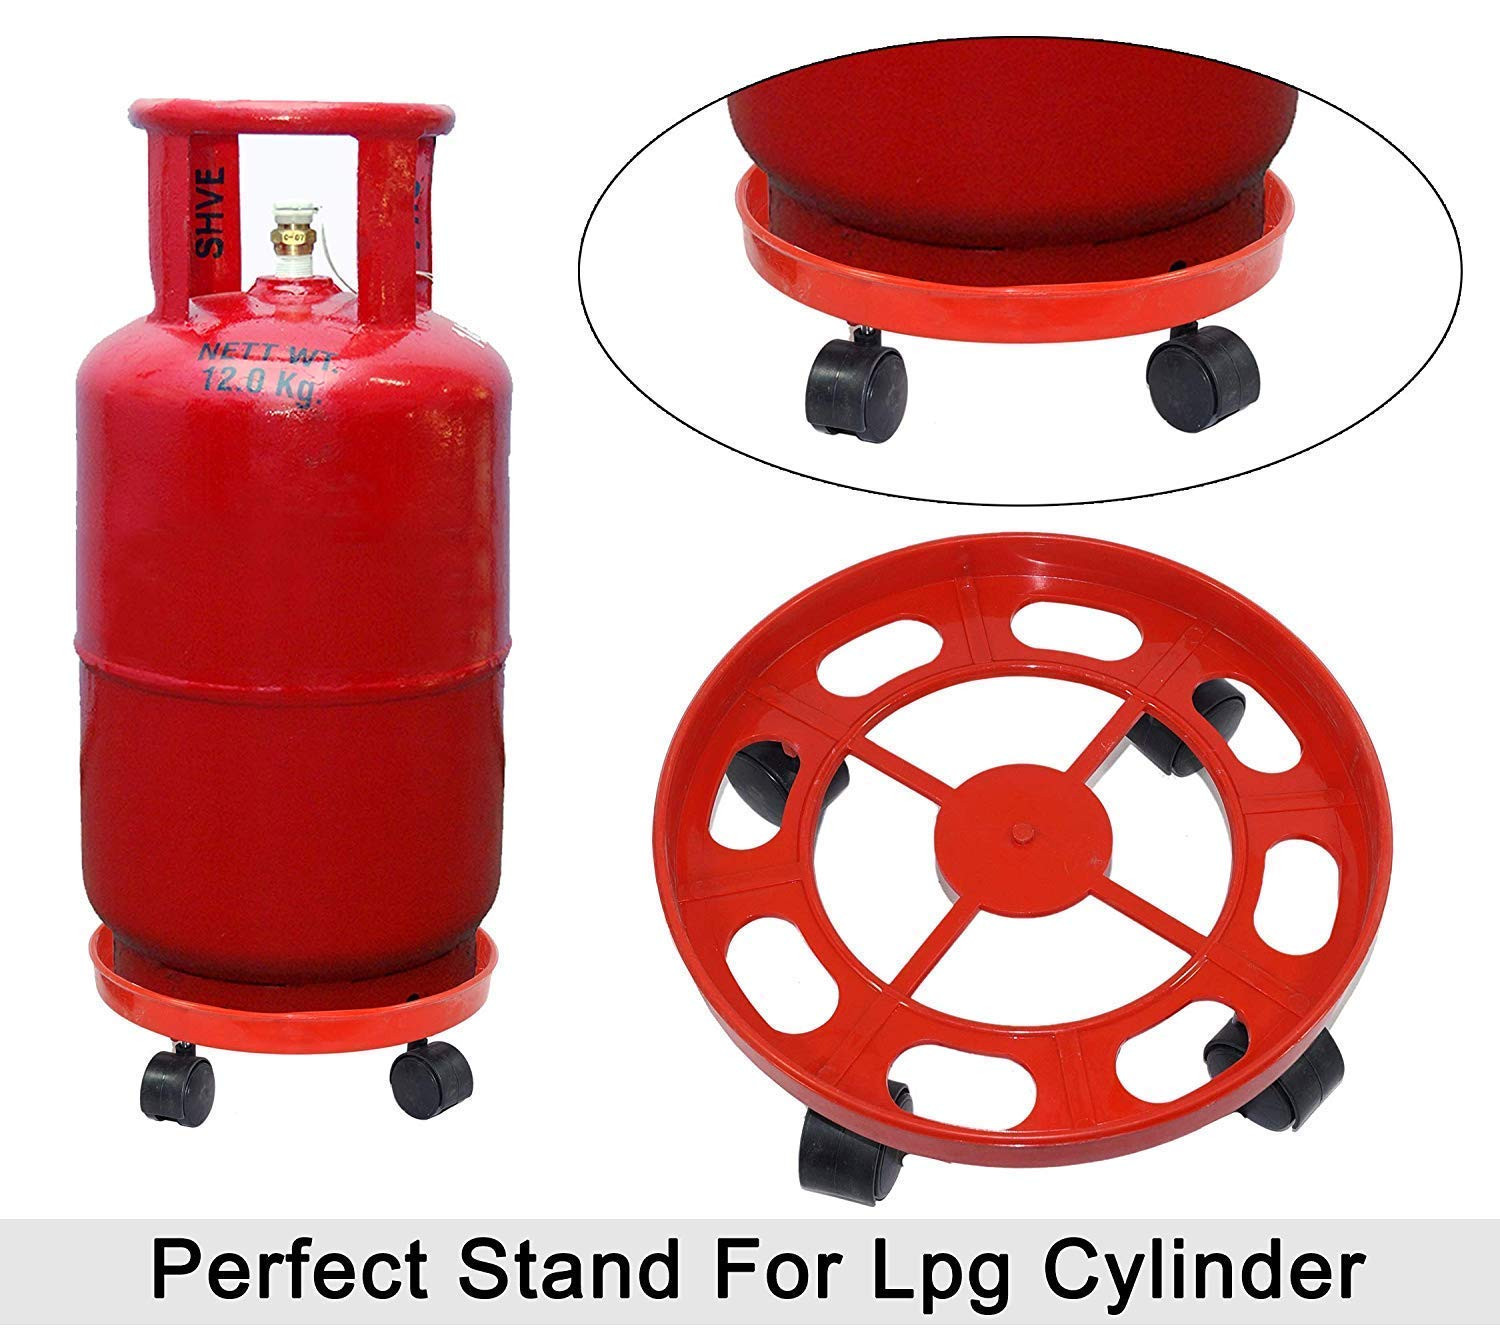 Kuber industries Cylinder Easily Movable Plastic Trolley Stand with Wheels (Red)